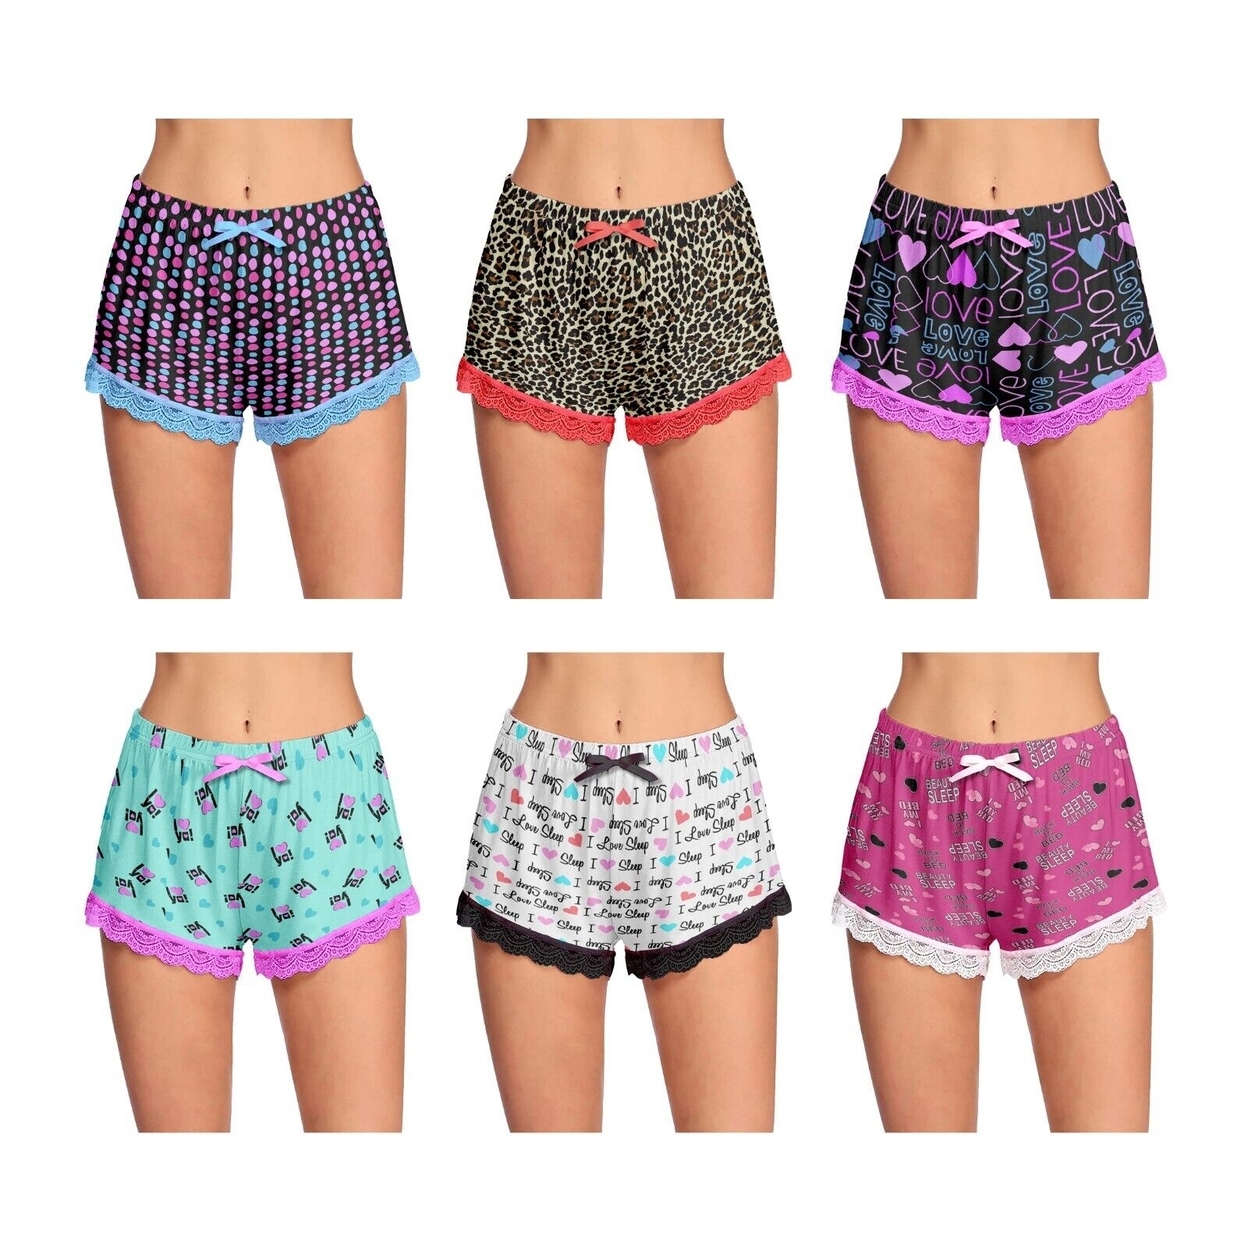 Multi-Pack: Women's Ultra-Soft Cozy Fun Printed Lace Trim Pajama Lounge Shorts - 2-pack, Small, Love